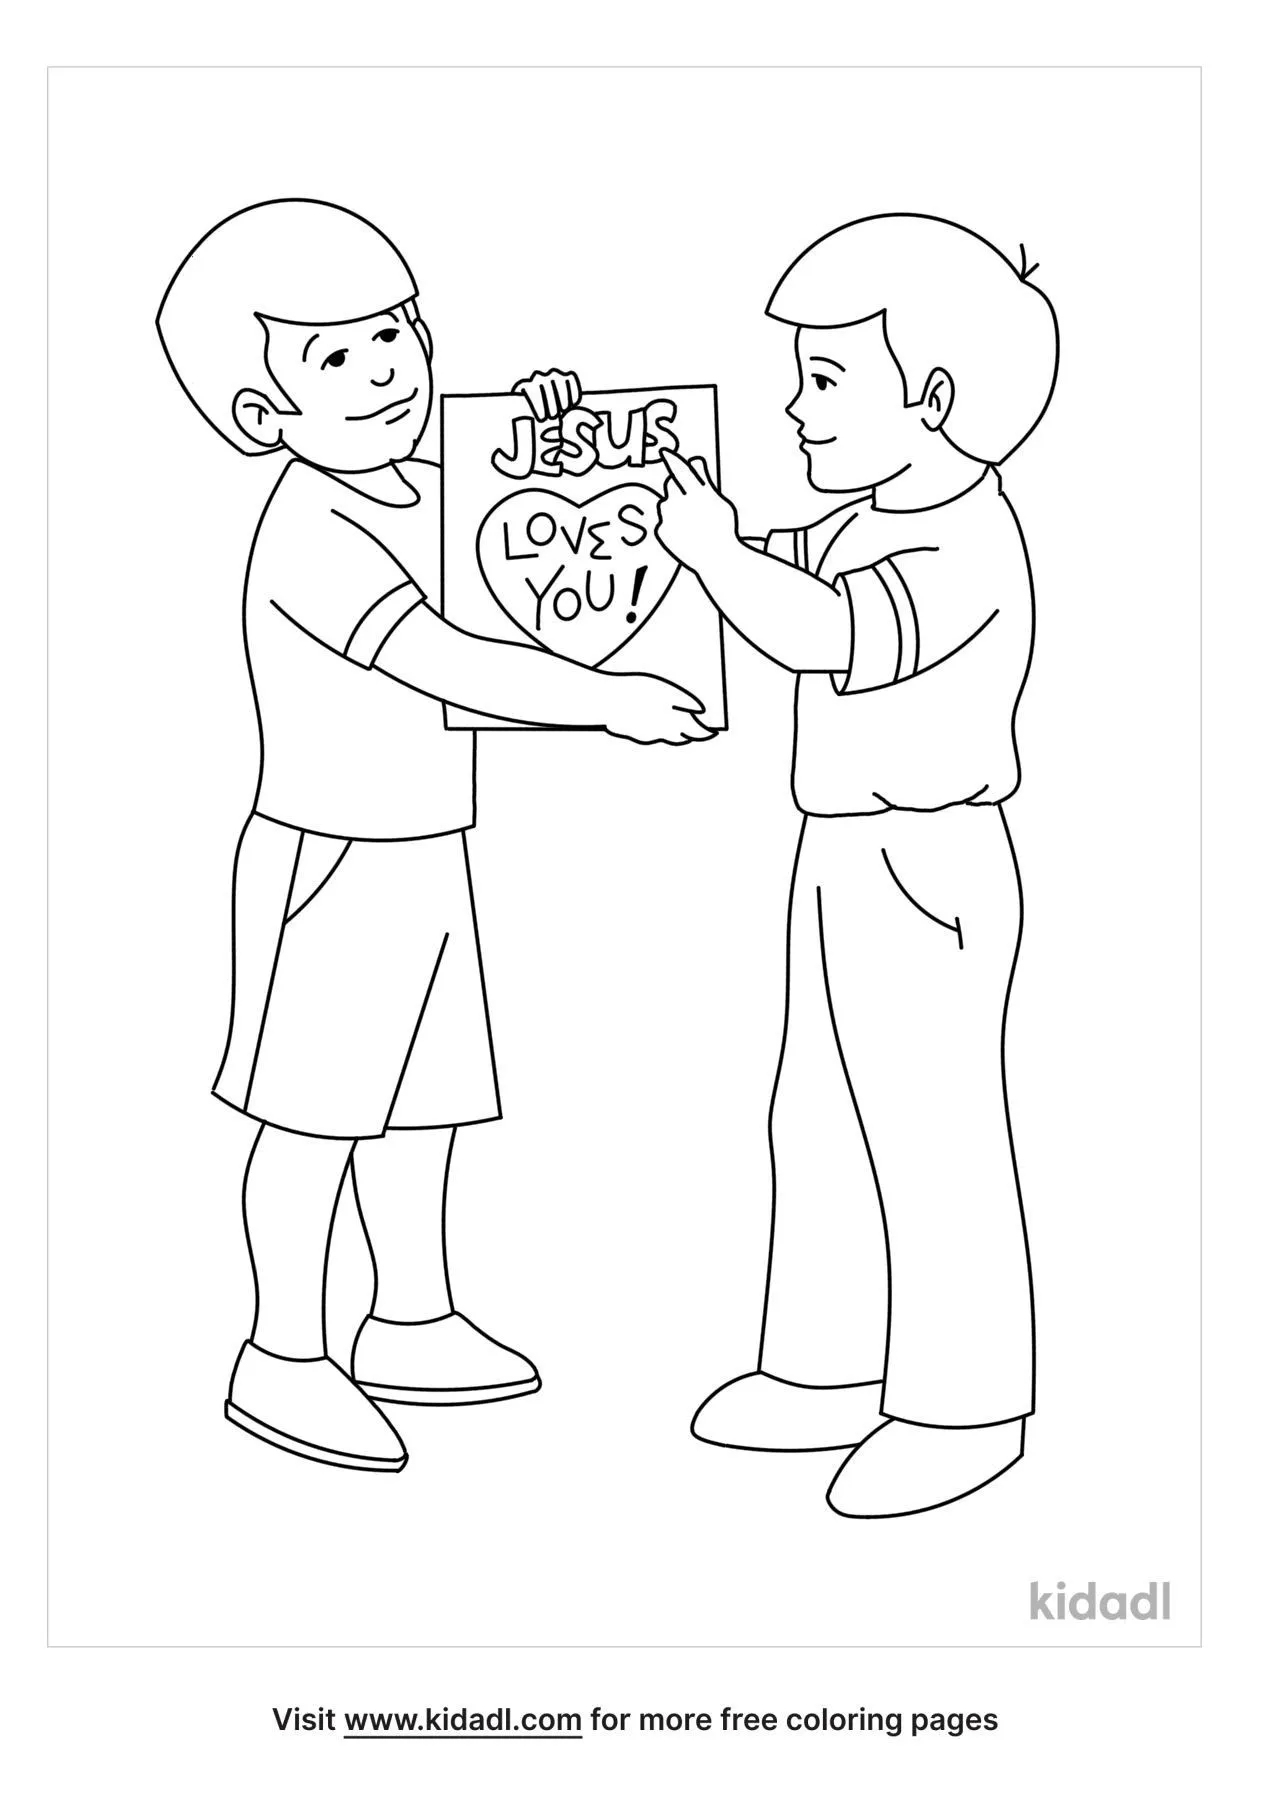 Free telling friends about jesus coloring page coloring page printables